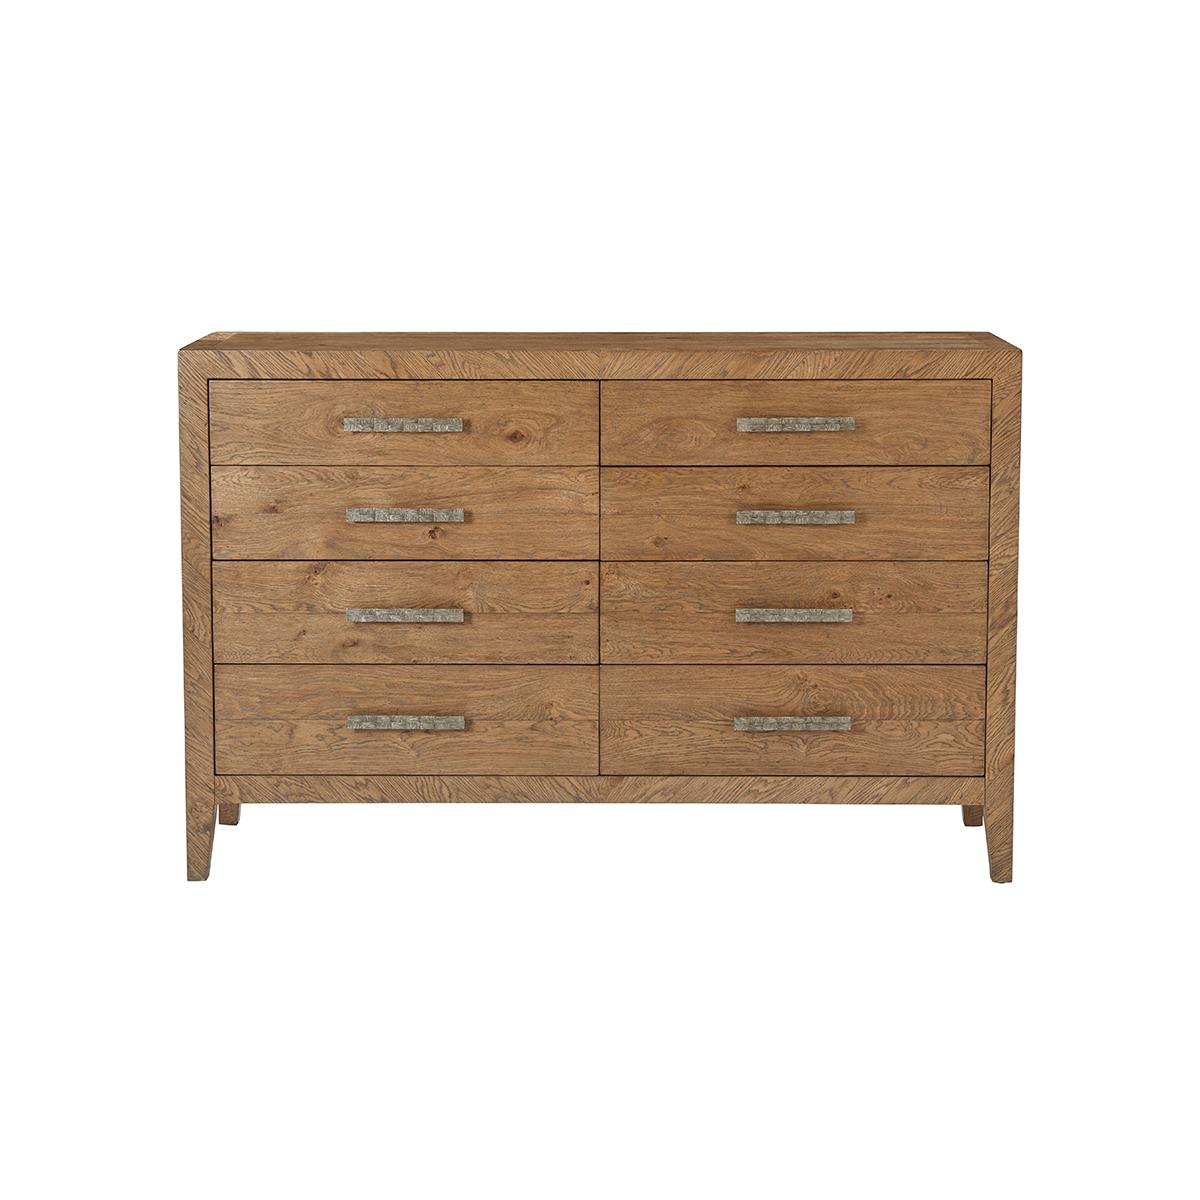 Vietnamese Southern Rustic Dresser For Sale